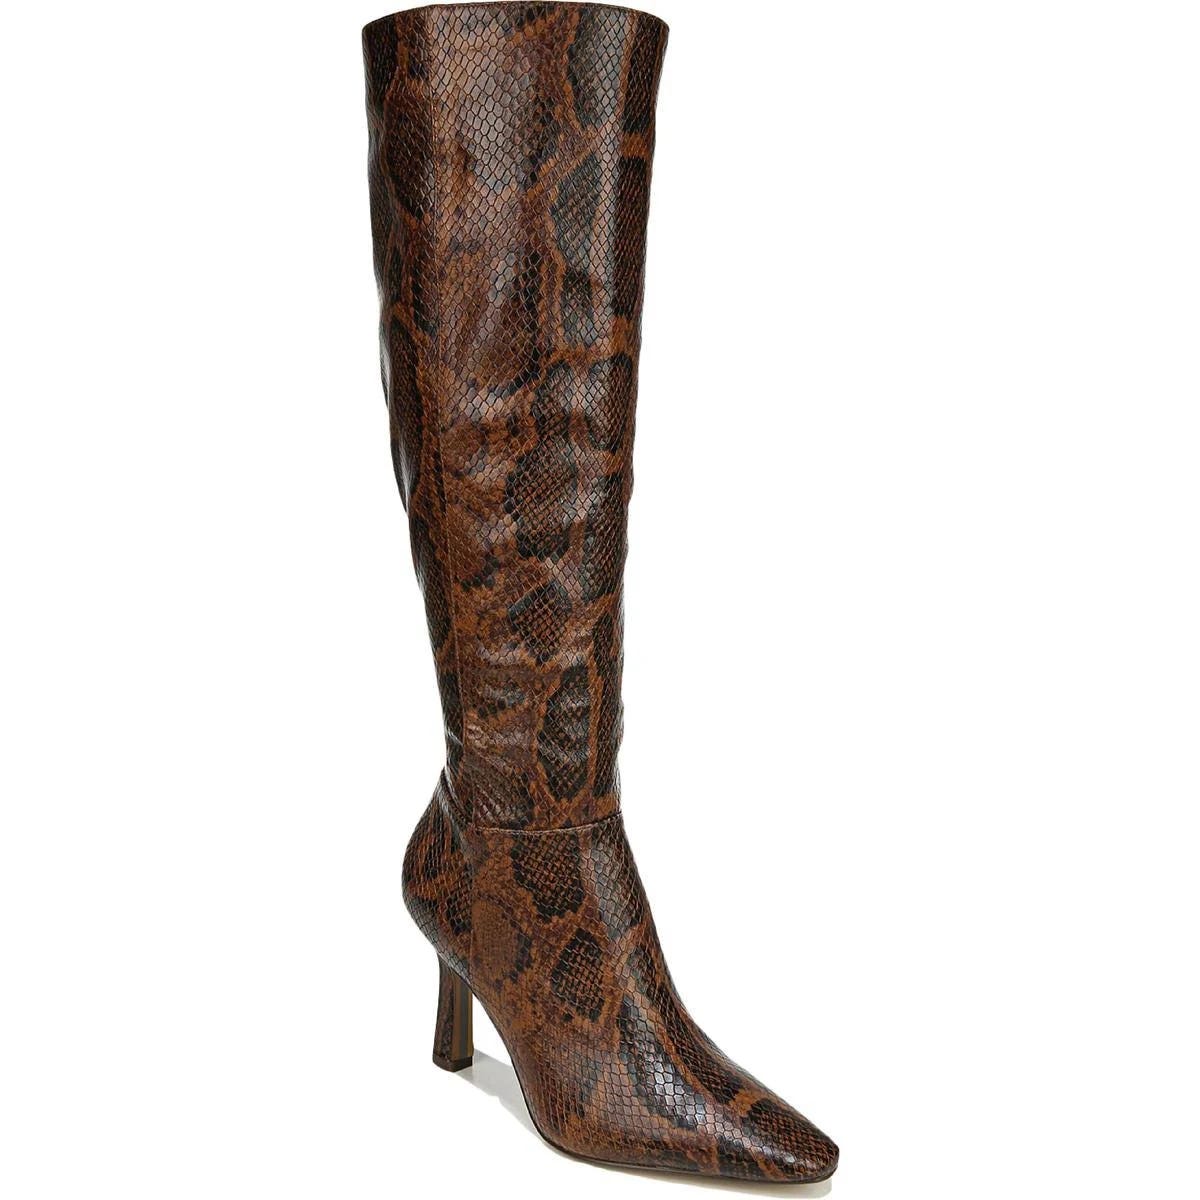 Fashionable Snakeskin Embossed Knee-High Boots | Image